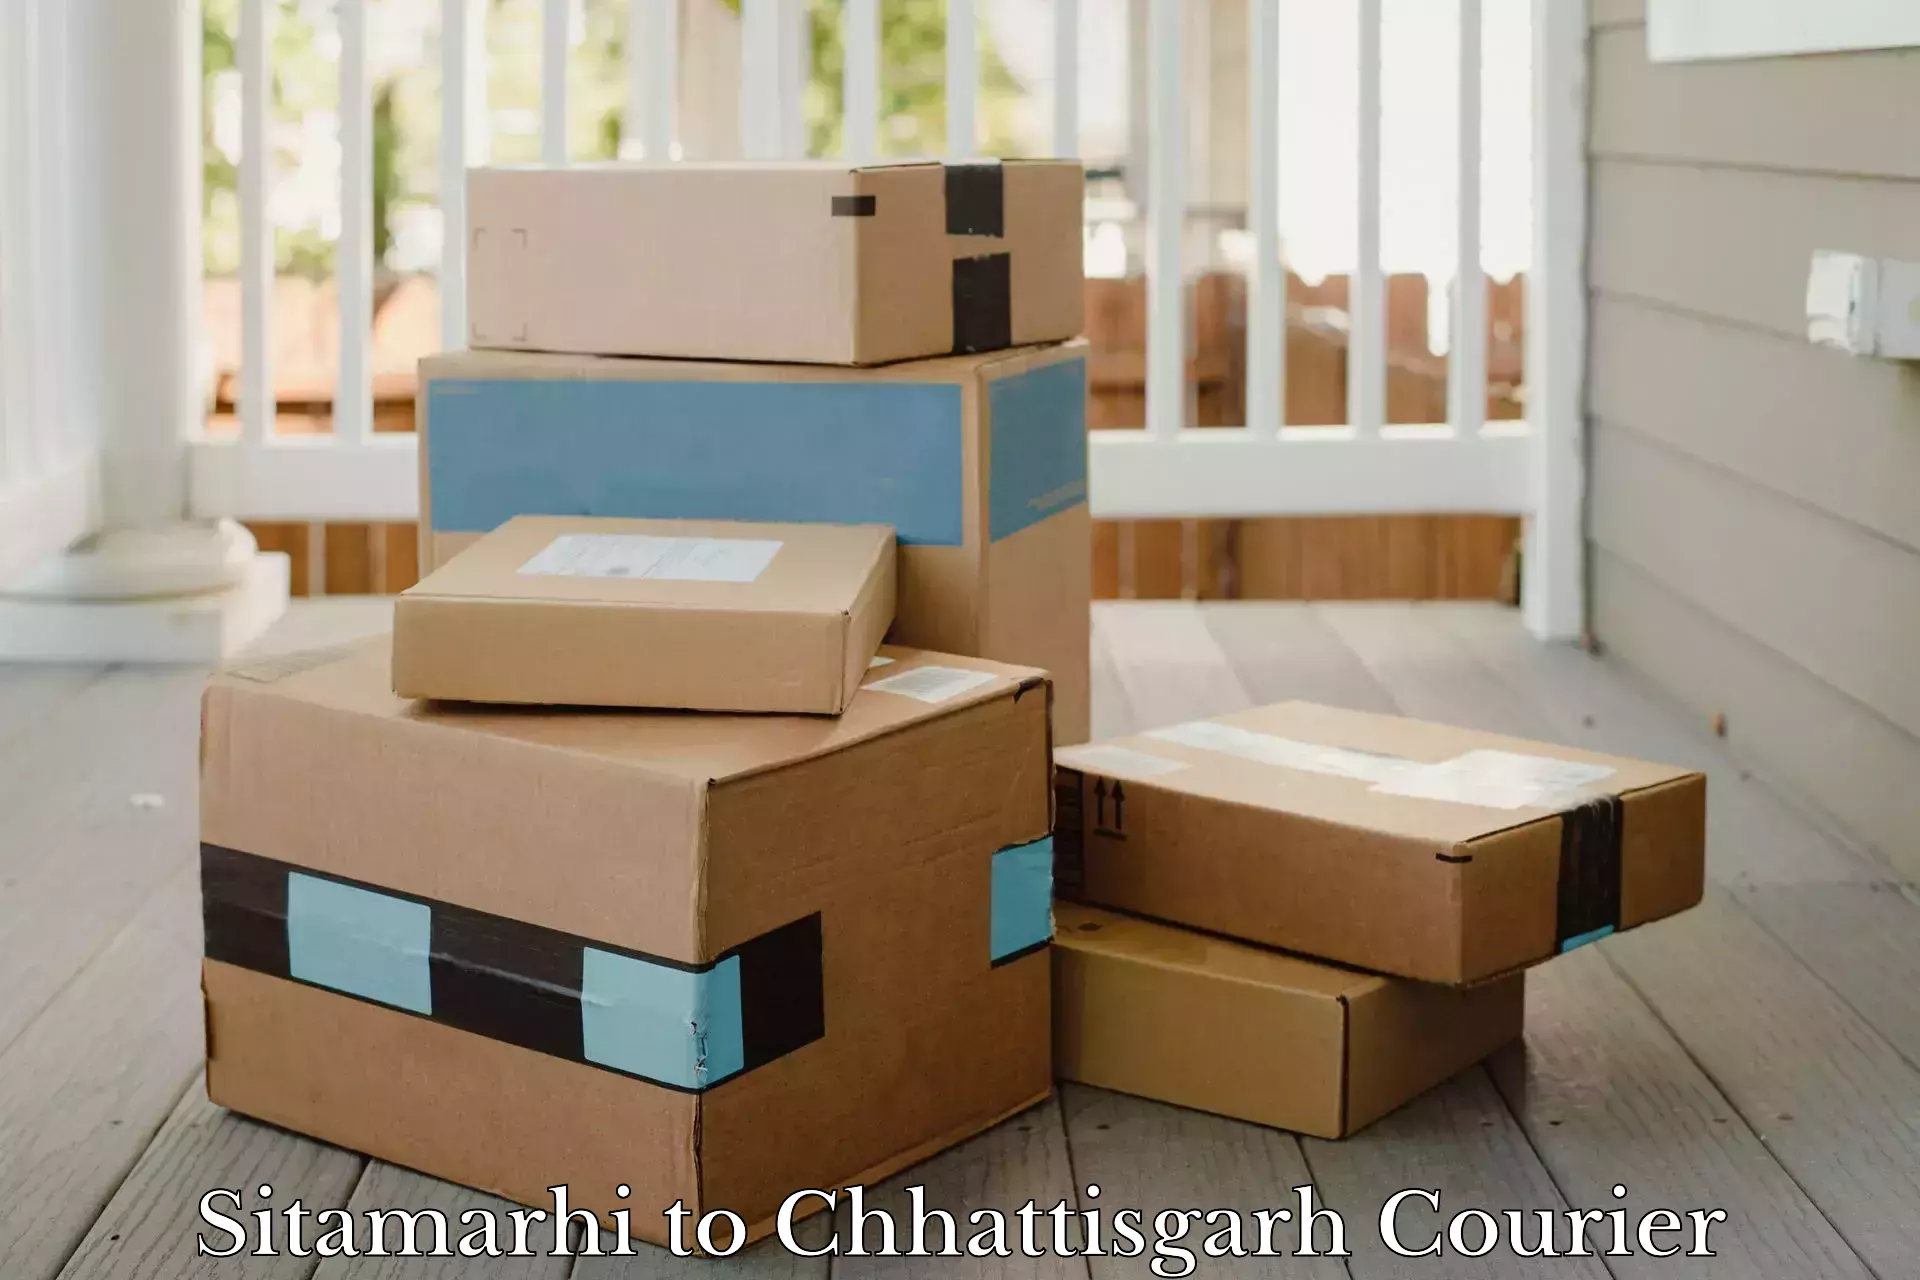 Subscription-based courier Sitamarhi to Khairagarh